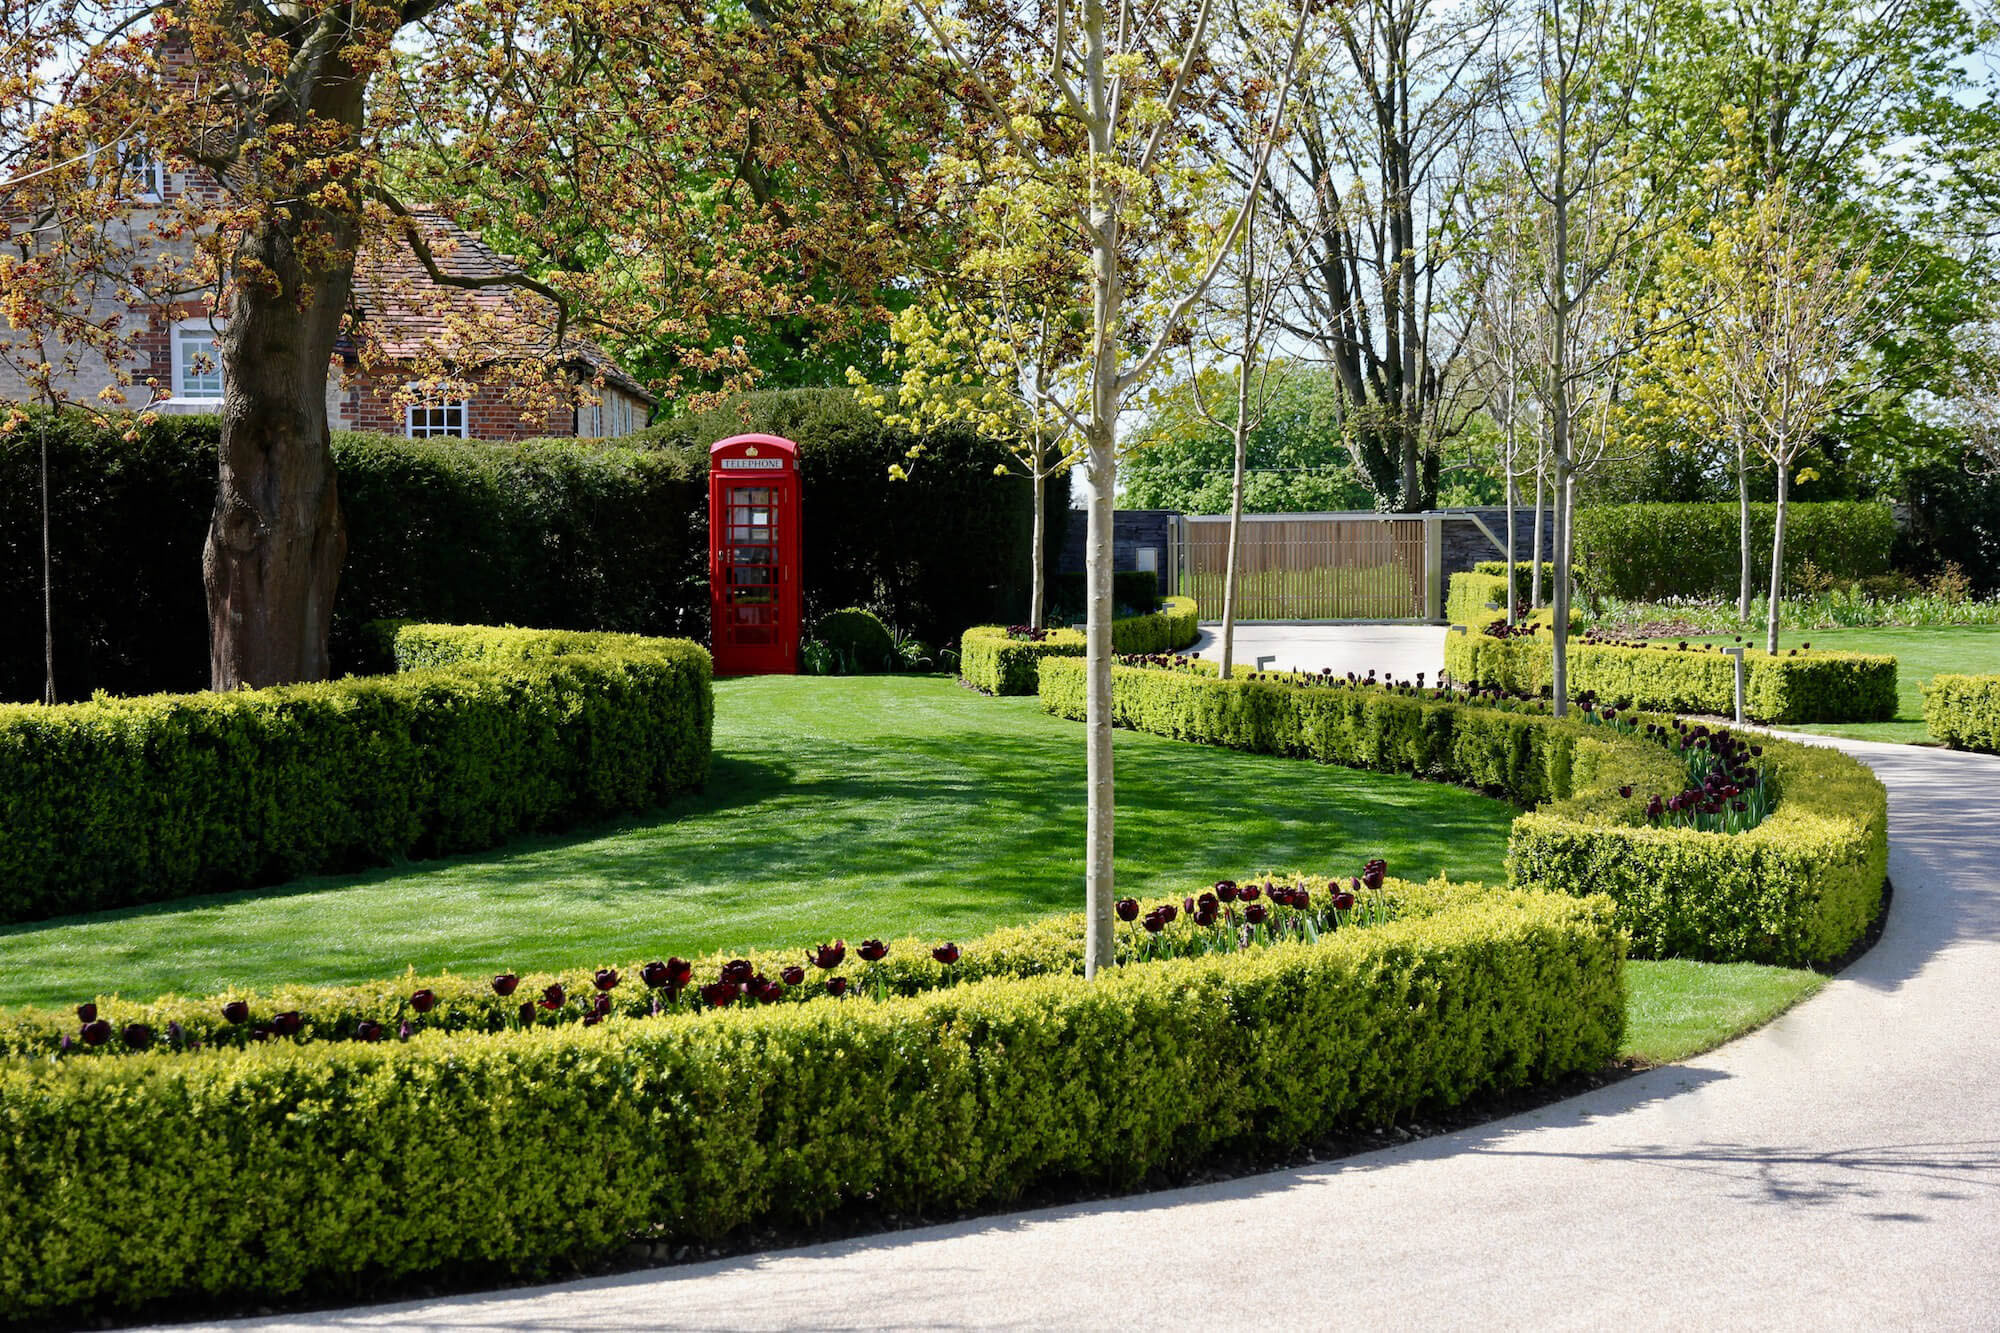 driveway and red English telephone box with black tulips in a landscape construction